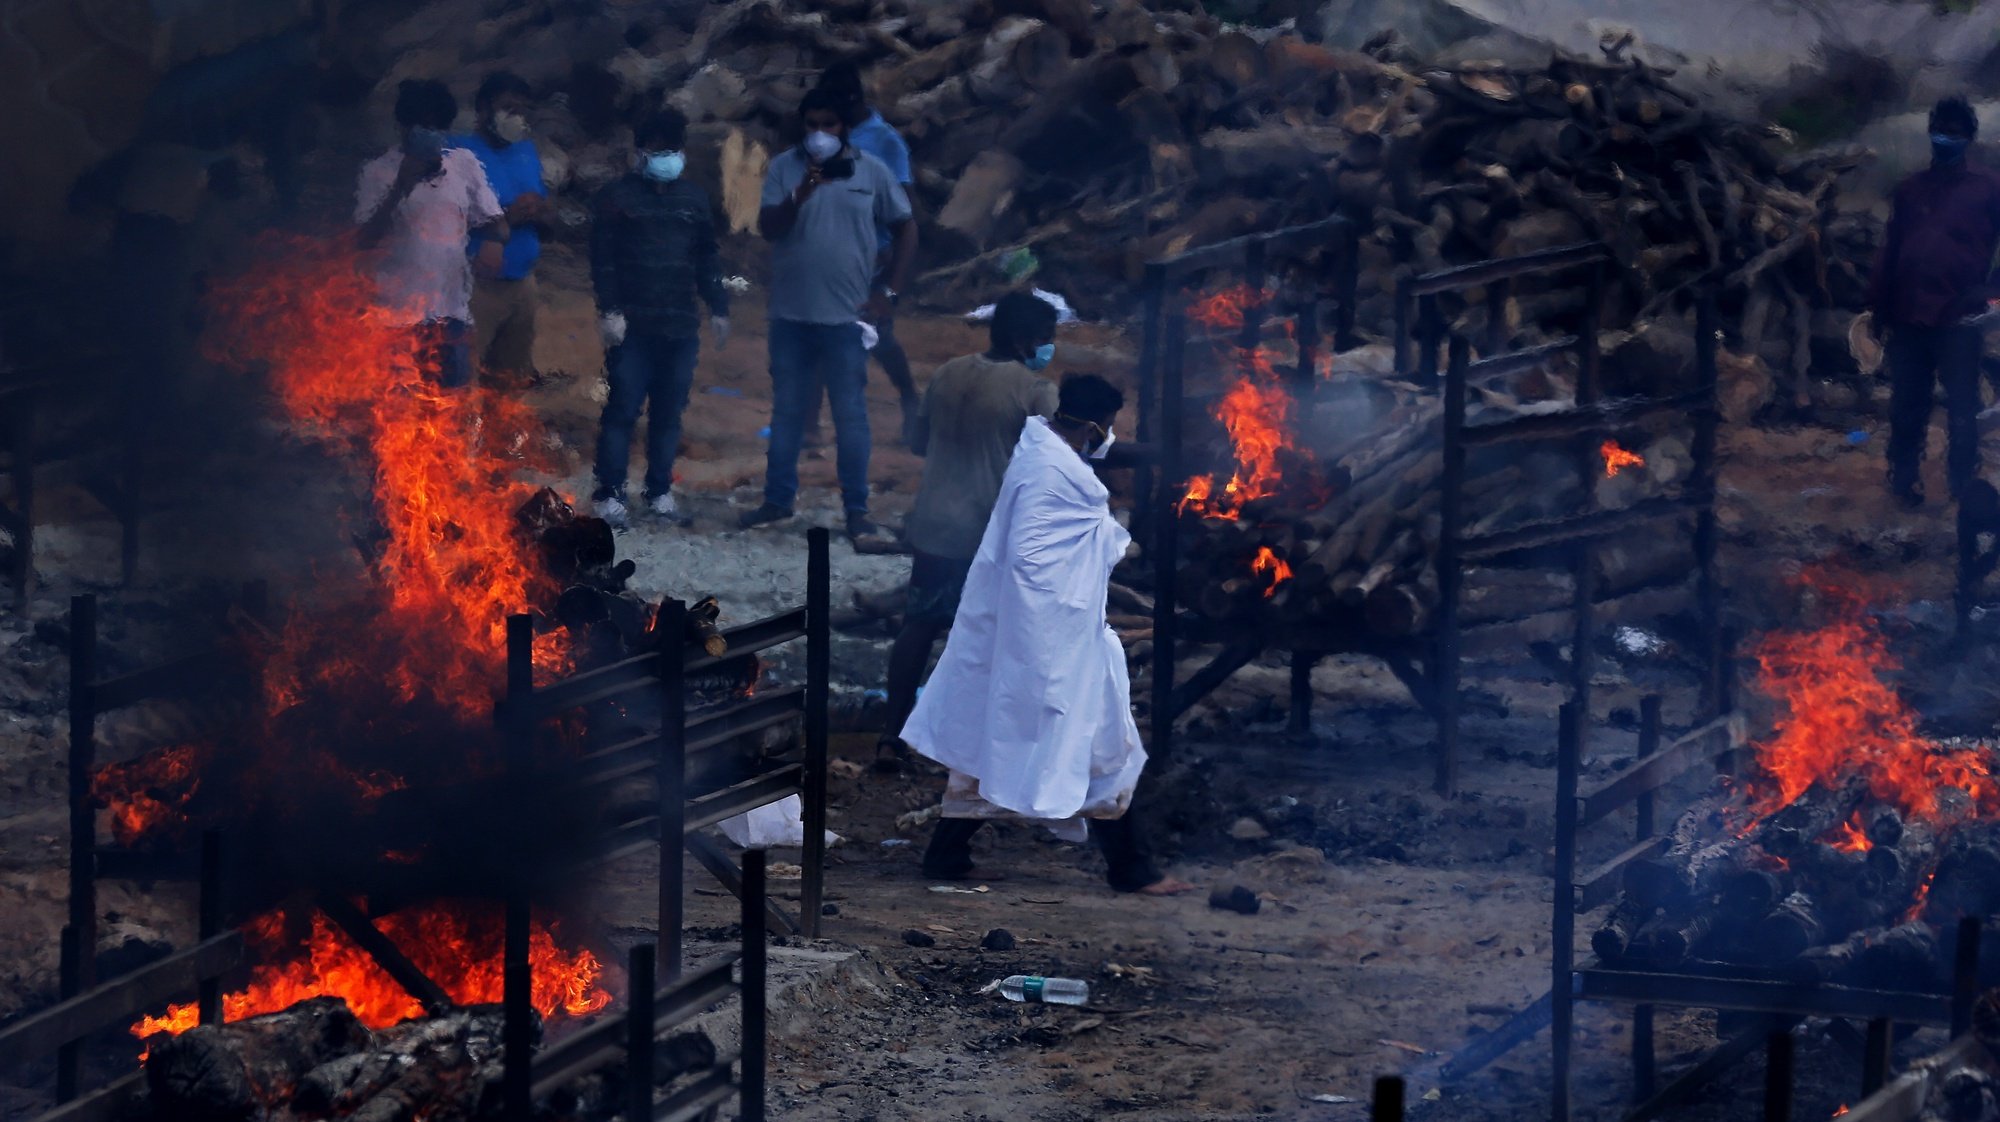 epaselect epa09209124 Funeral pyres for COVID-19 victims burn during a mass funeral at a makeshift cremation ground at Giddenahalli in the outskirts of Bangalore, India, 18 May 2021. India surpassed 25 million cases of the coronavirus on 18 May since the start of the pandemic, despite a decline in infections in recent days, while also recording a new daily record of 4,329 deaths. The country registered 263,533 infections in the last 24 hours, according to data from the Indian Ministry of Health, the lowest number in a month after India reported a record of over 400,000 cases everyday two weeks ago. The total Covid-19 toll now stands at 25.2 million cases - second highest after the United States - and 278,719 deaths - third highest after the US and Brazil.  EPA/JAGADEESH NV